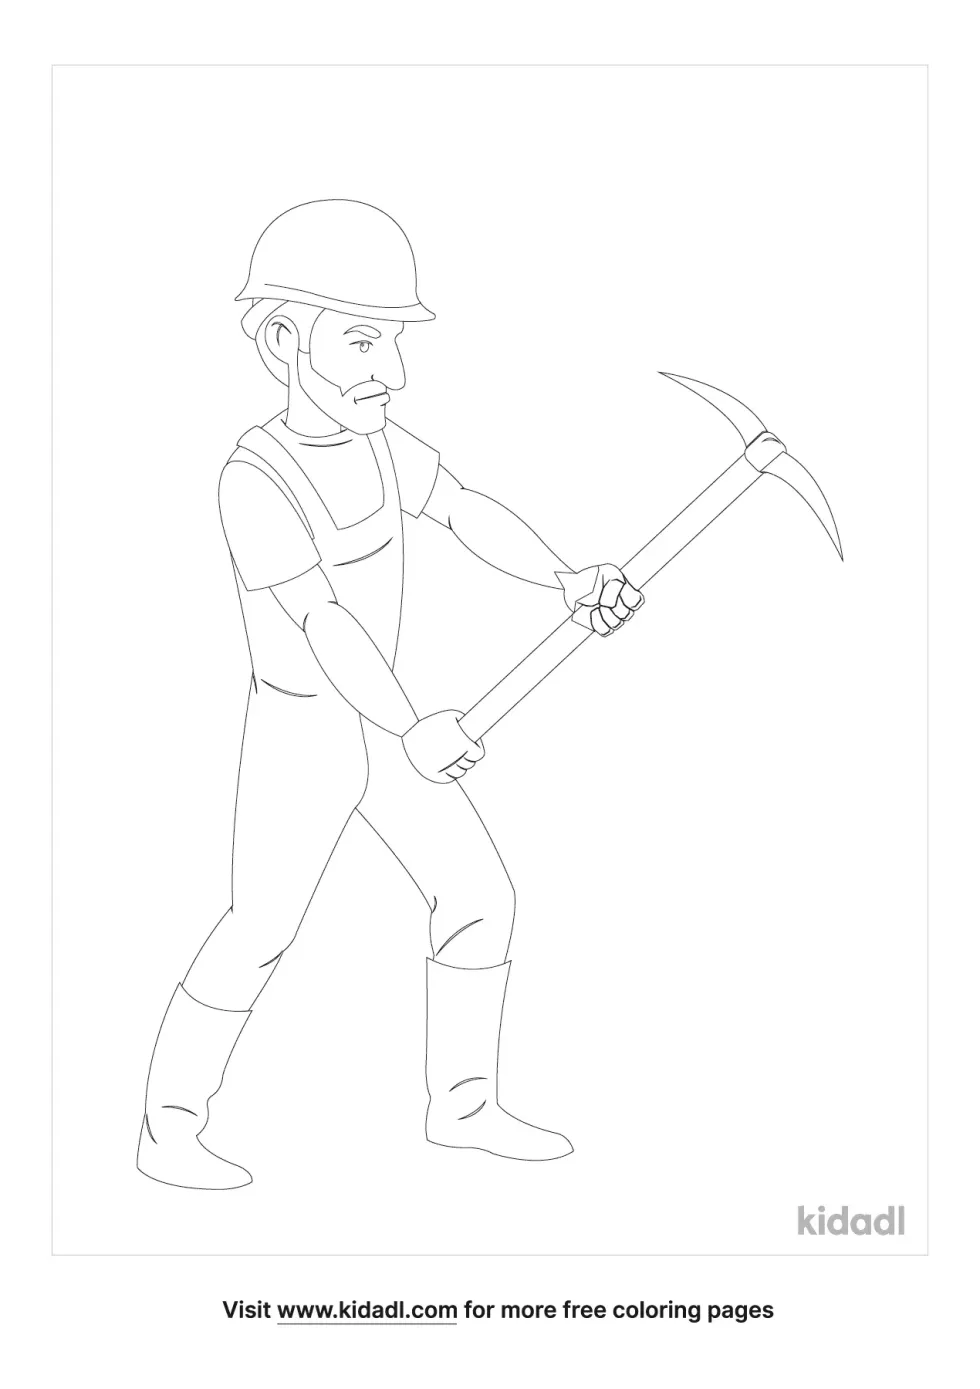 Miner Coloring Page